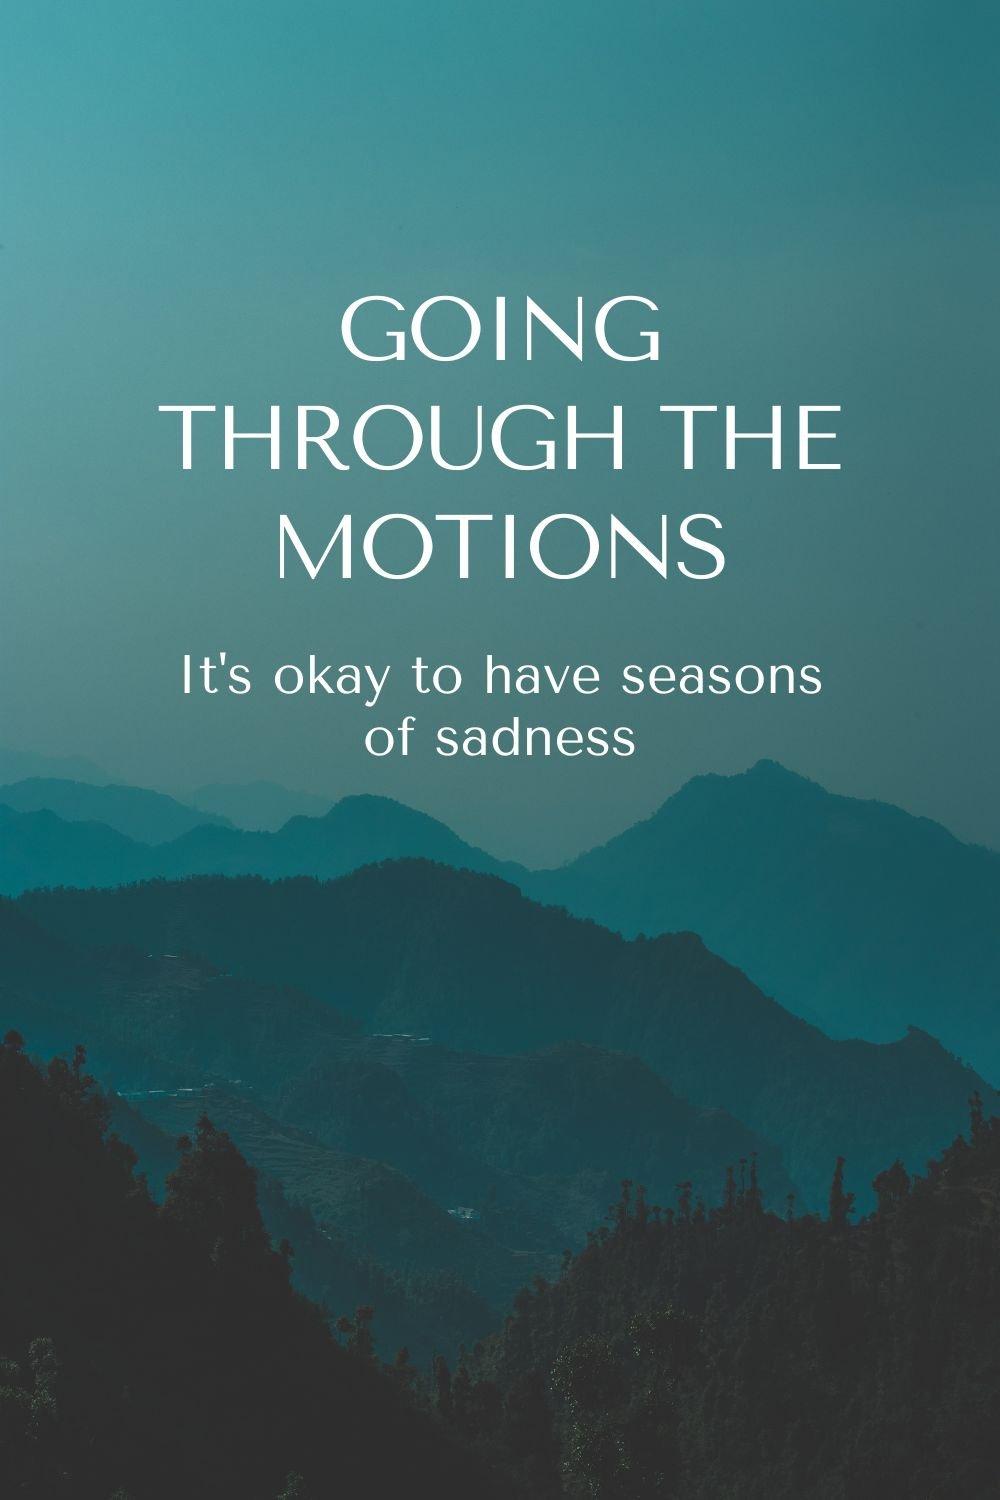 going through the motions: It's okay to have seasons of sadness